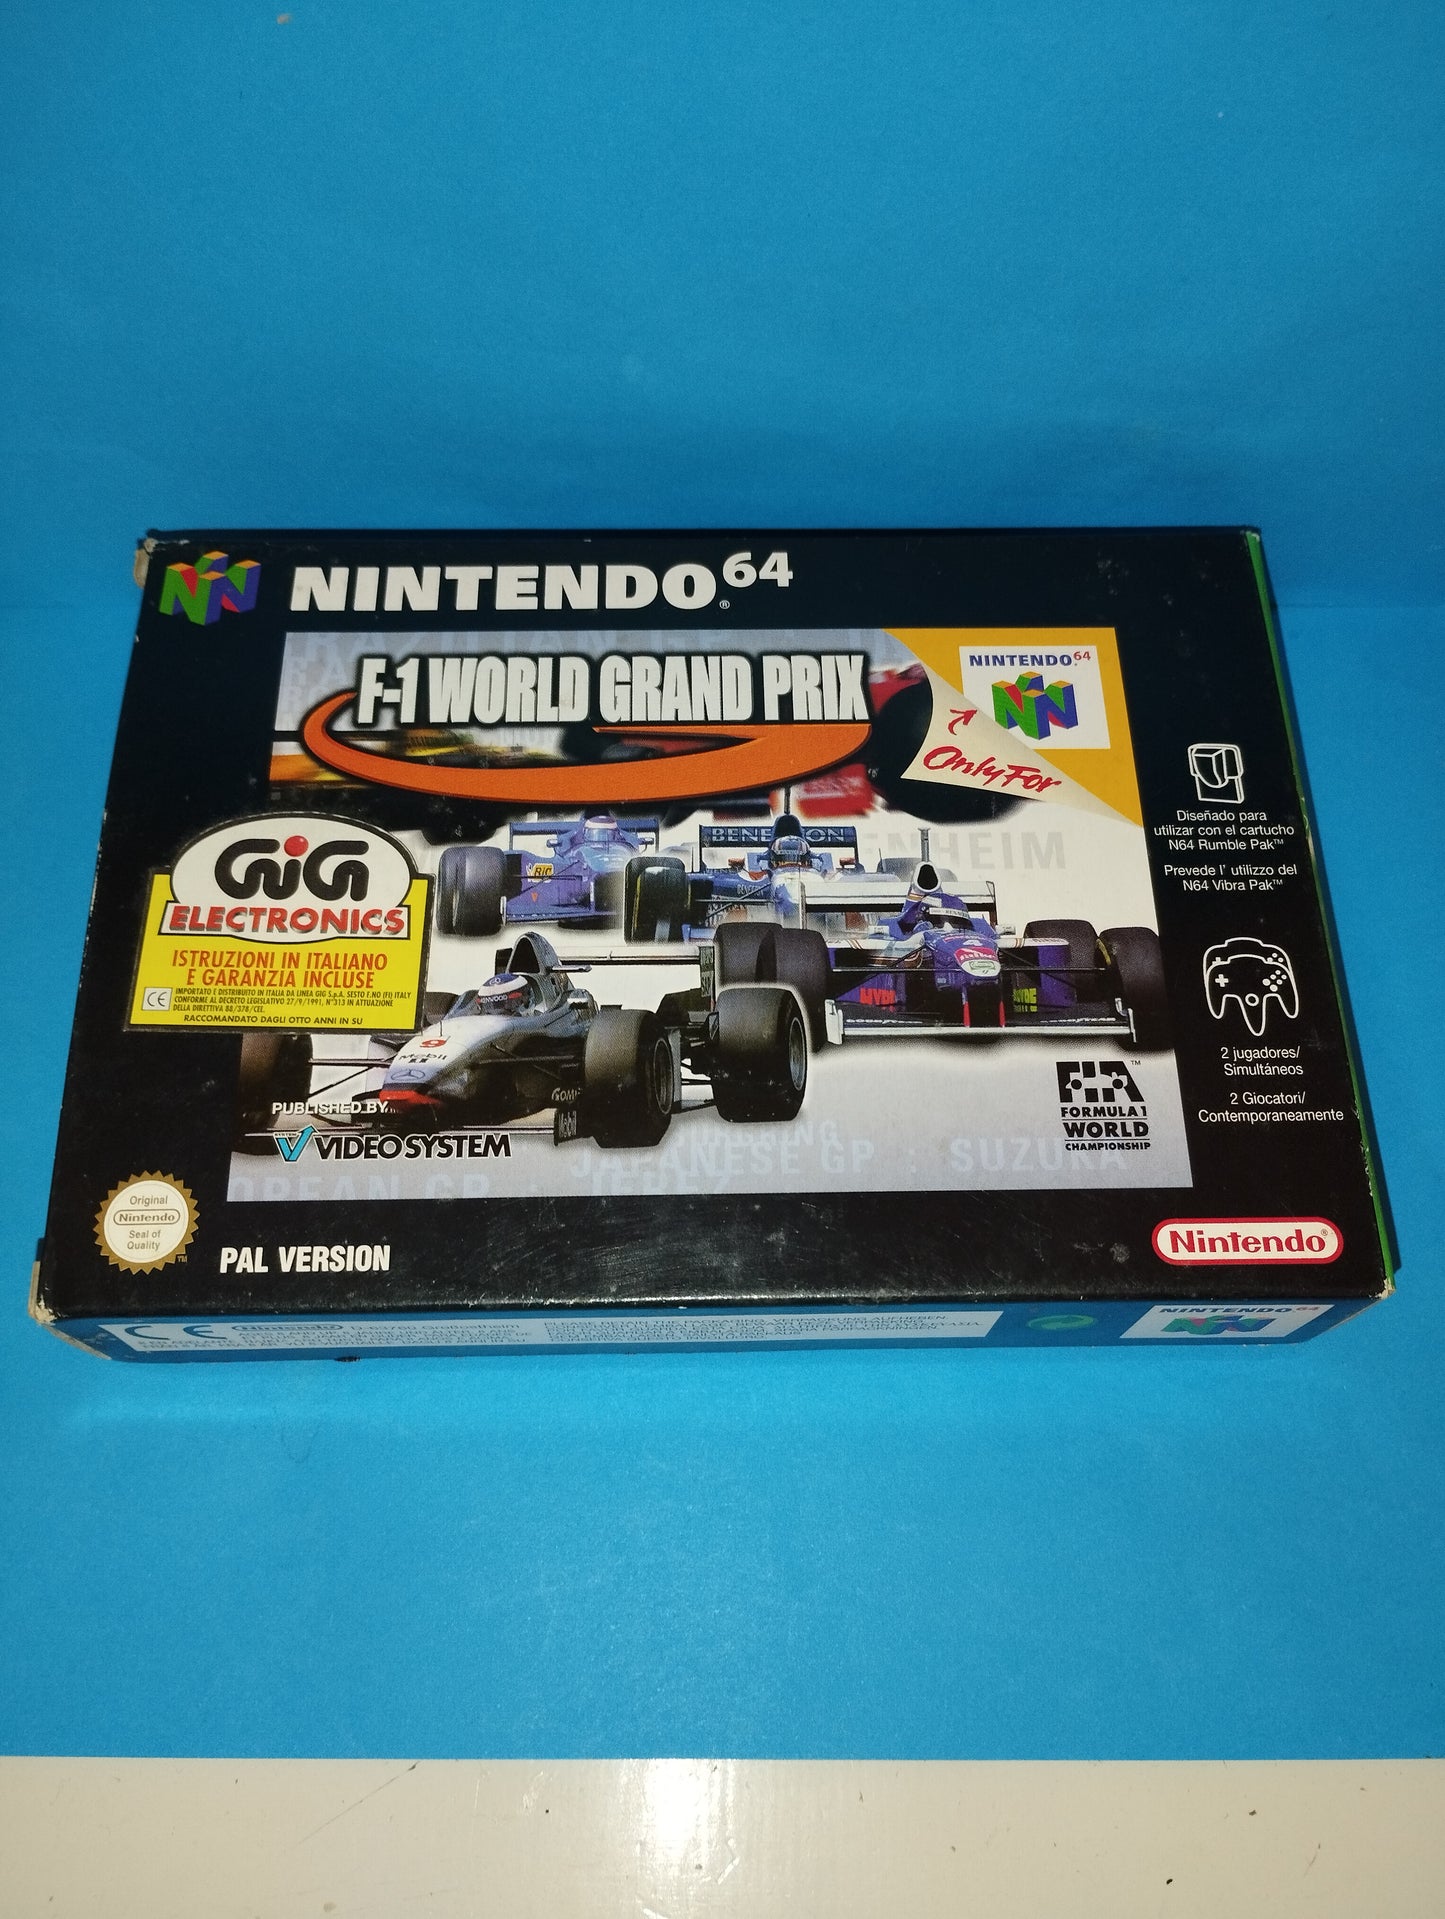 Nintendo 64 Game F-1 World Grand Prix
 Published in 1998